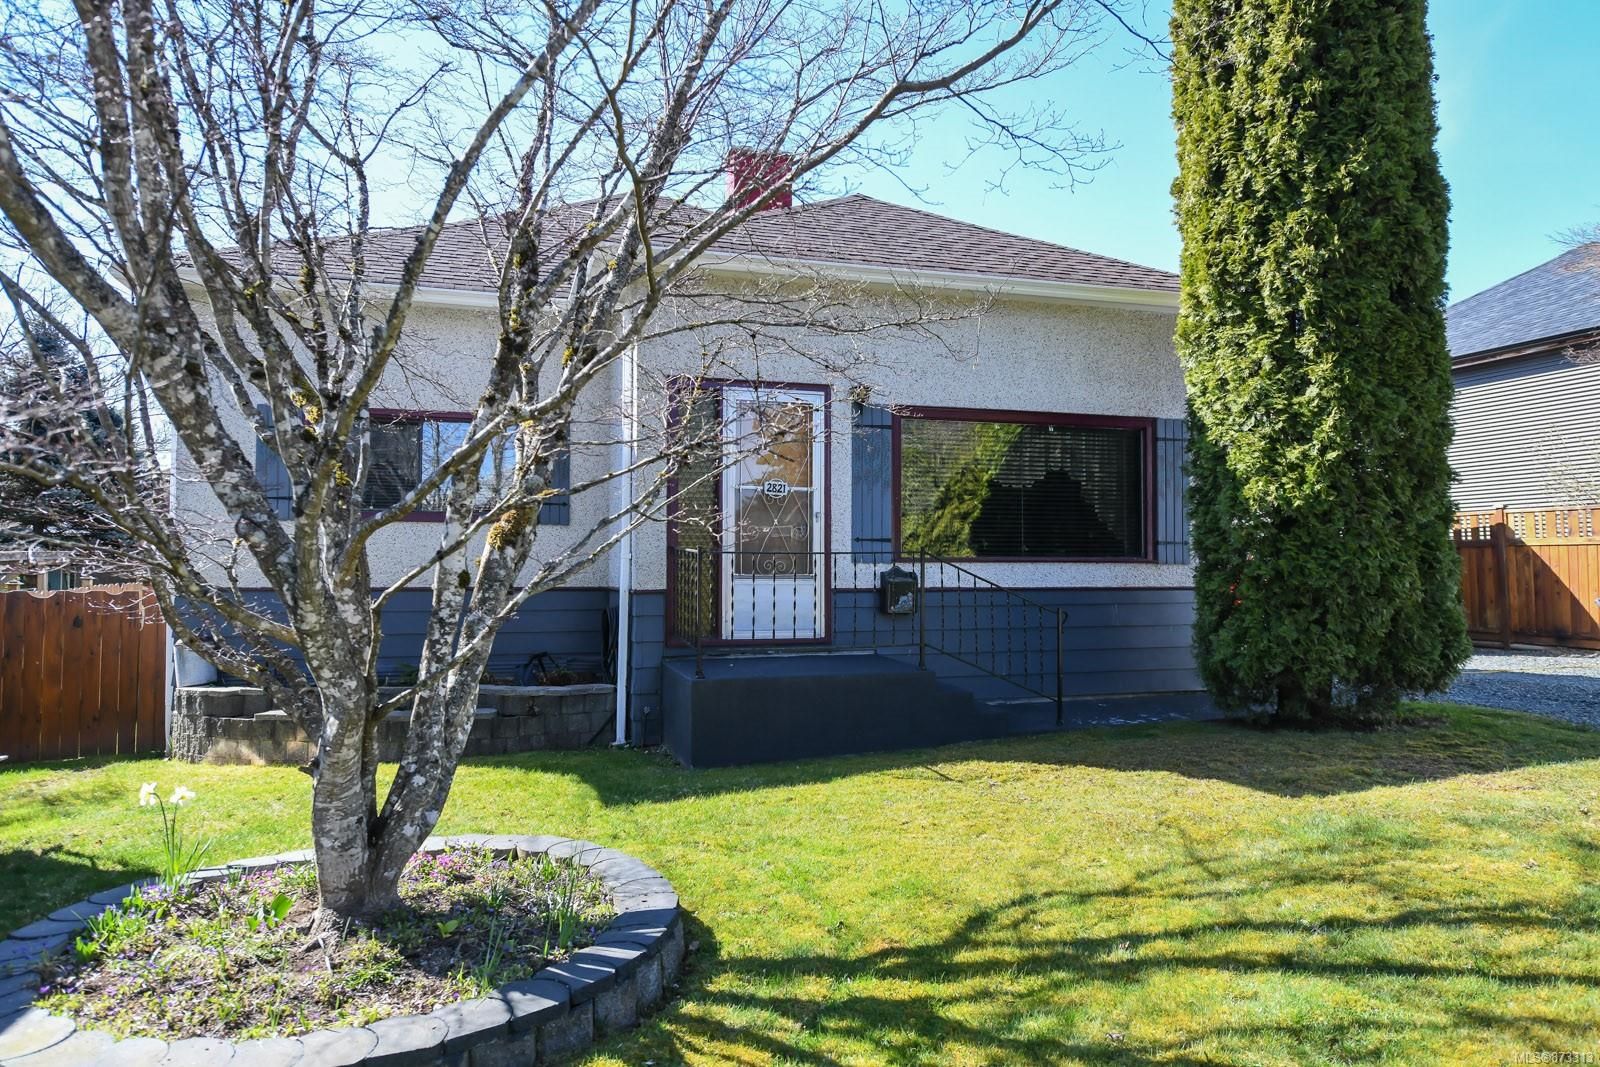 I have sold a property at 2821 Penrith Ave
